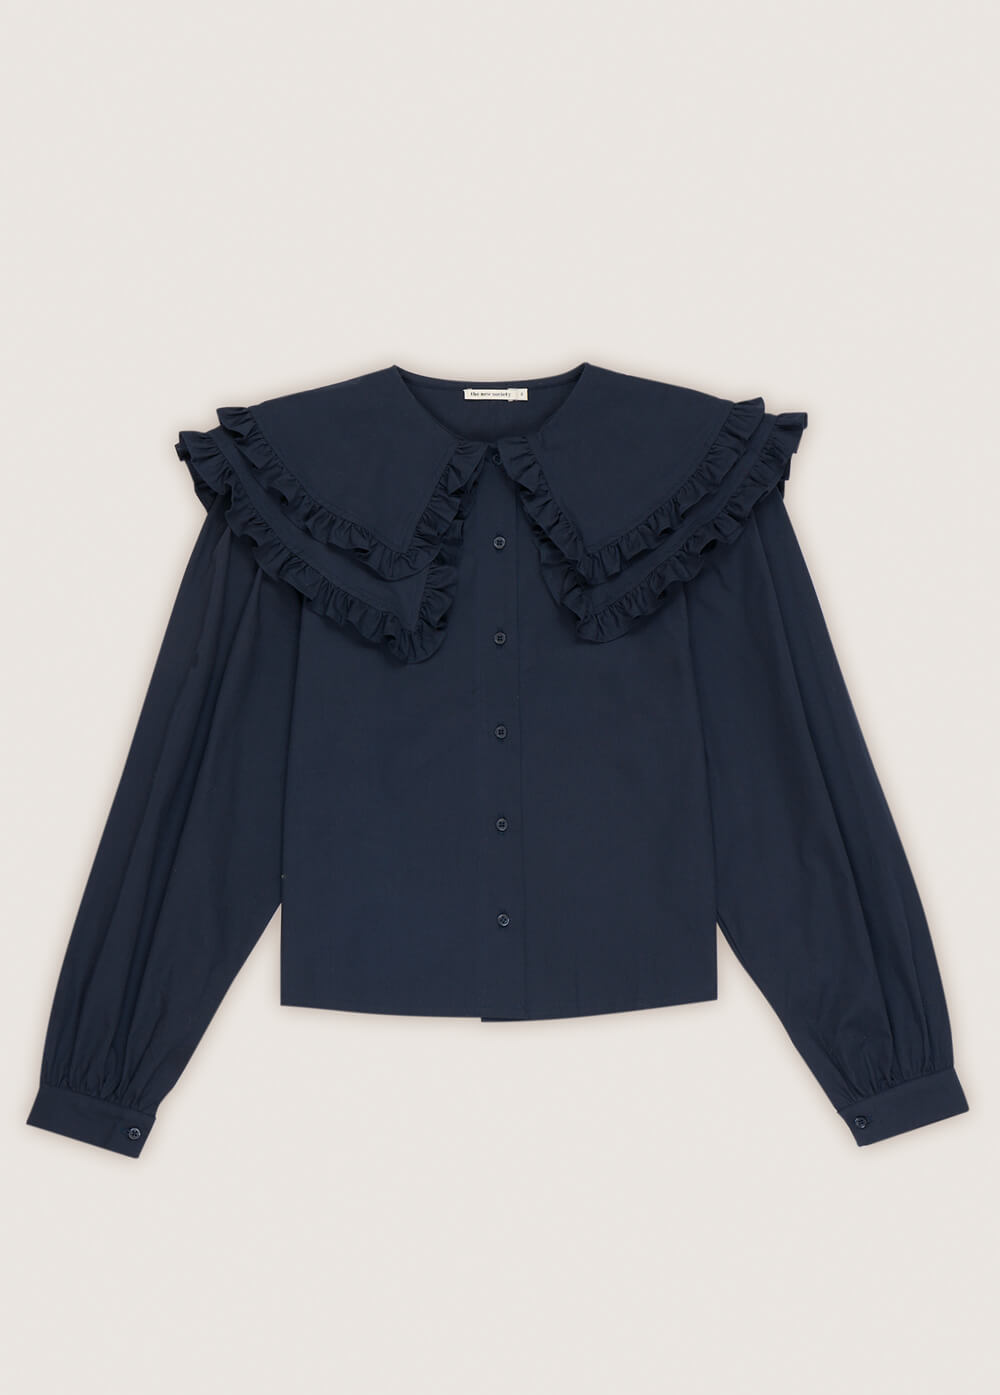 The oversized collar women's blouse is a statement and the most fashionable style this season. This organic cotton women's blouse is in a stunning dark blue colour with a large collar. Shop sustainable women's fashion and organic cotton women's blouses online in Hong Kong and Singapore at MiliMilu.